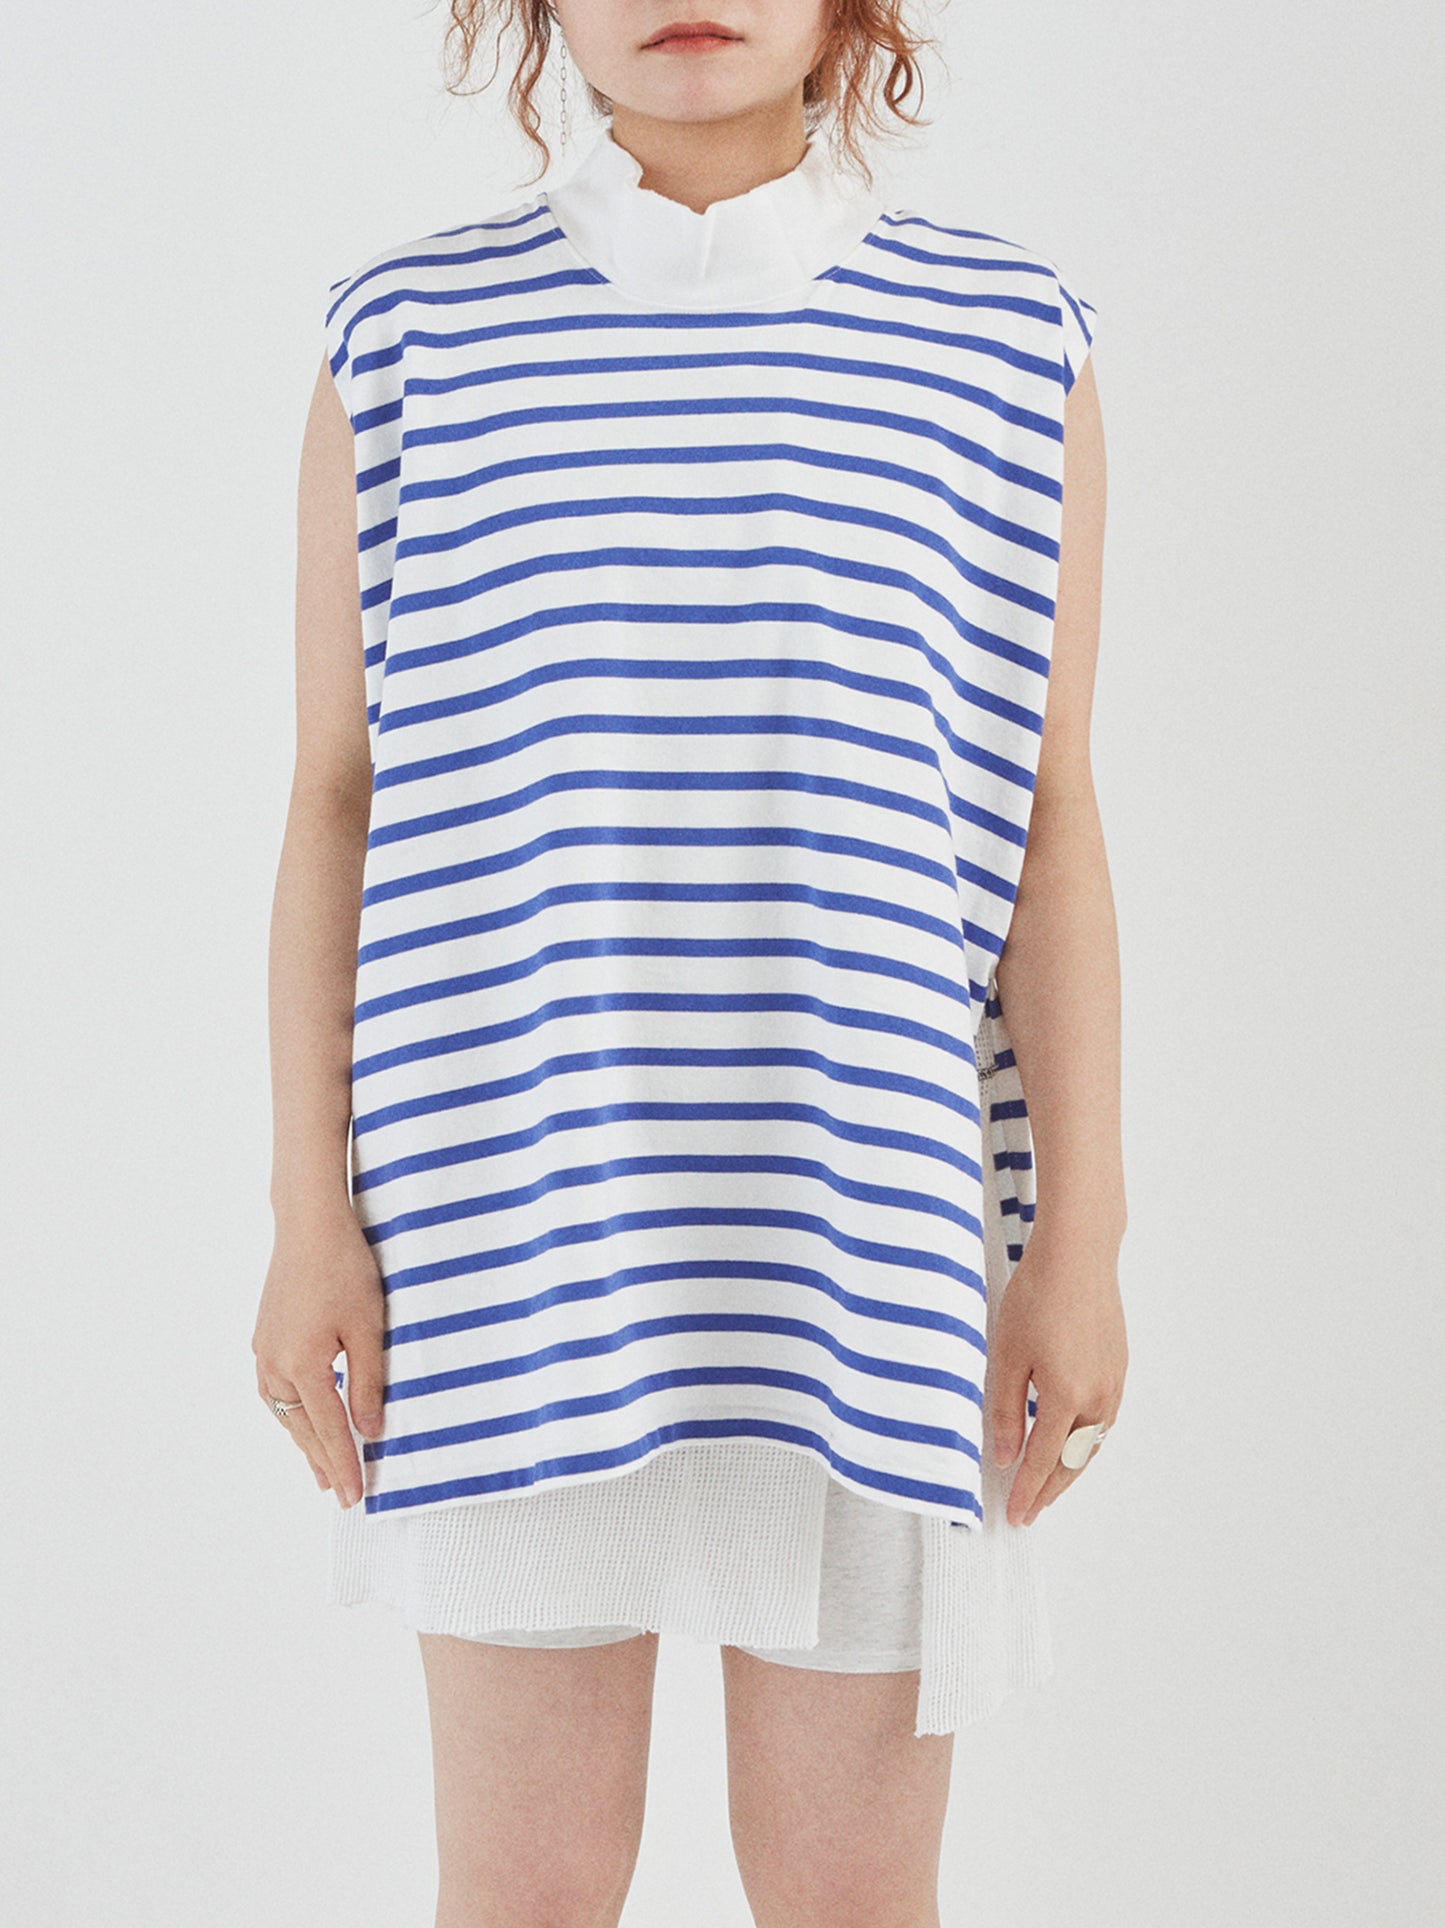 BAGGY N/S TEE COTTON BORDER JERSEY AM-C0204 White/Blue